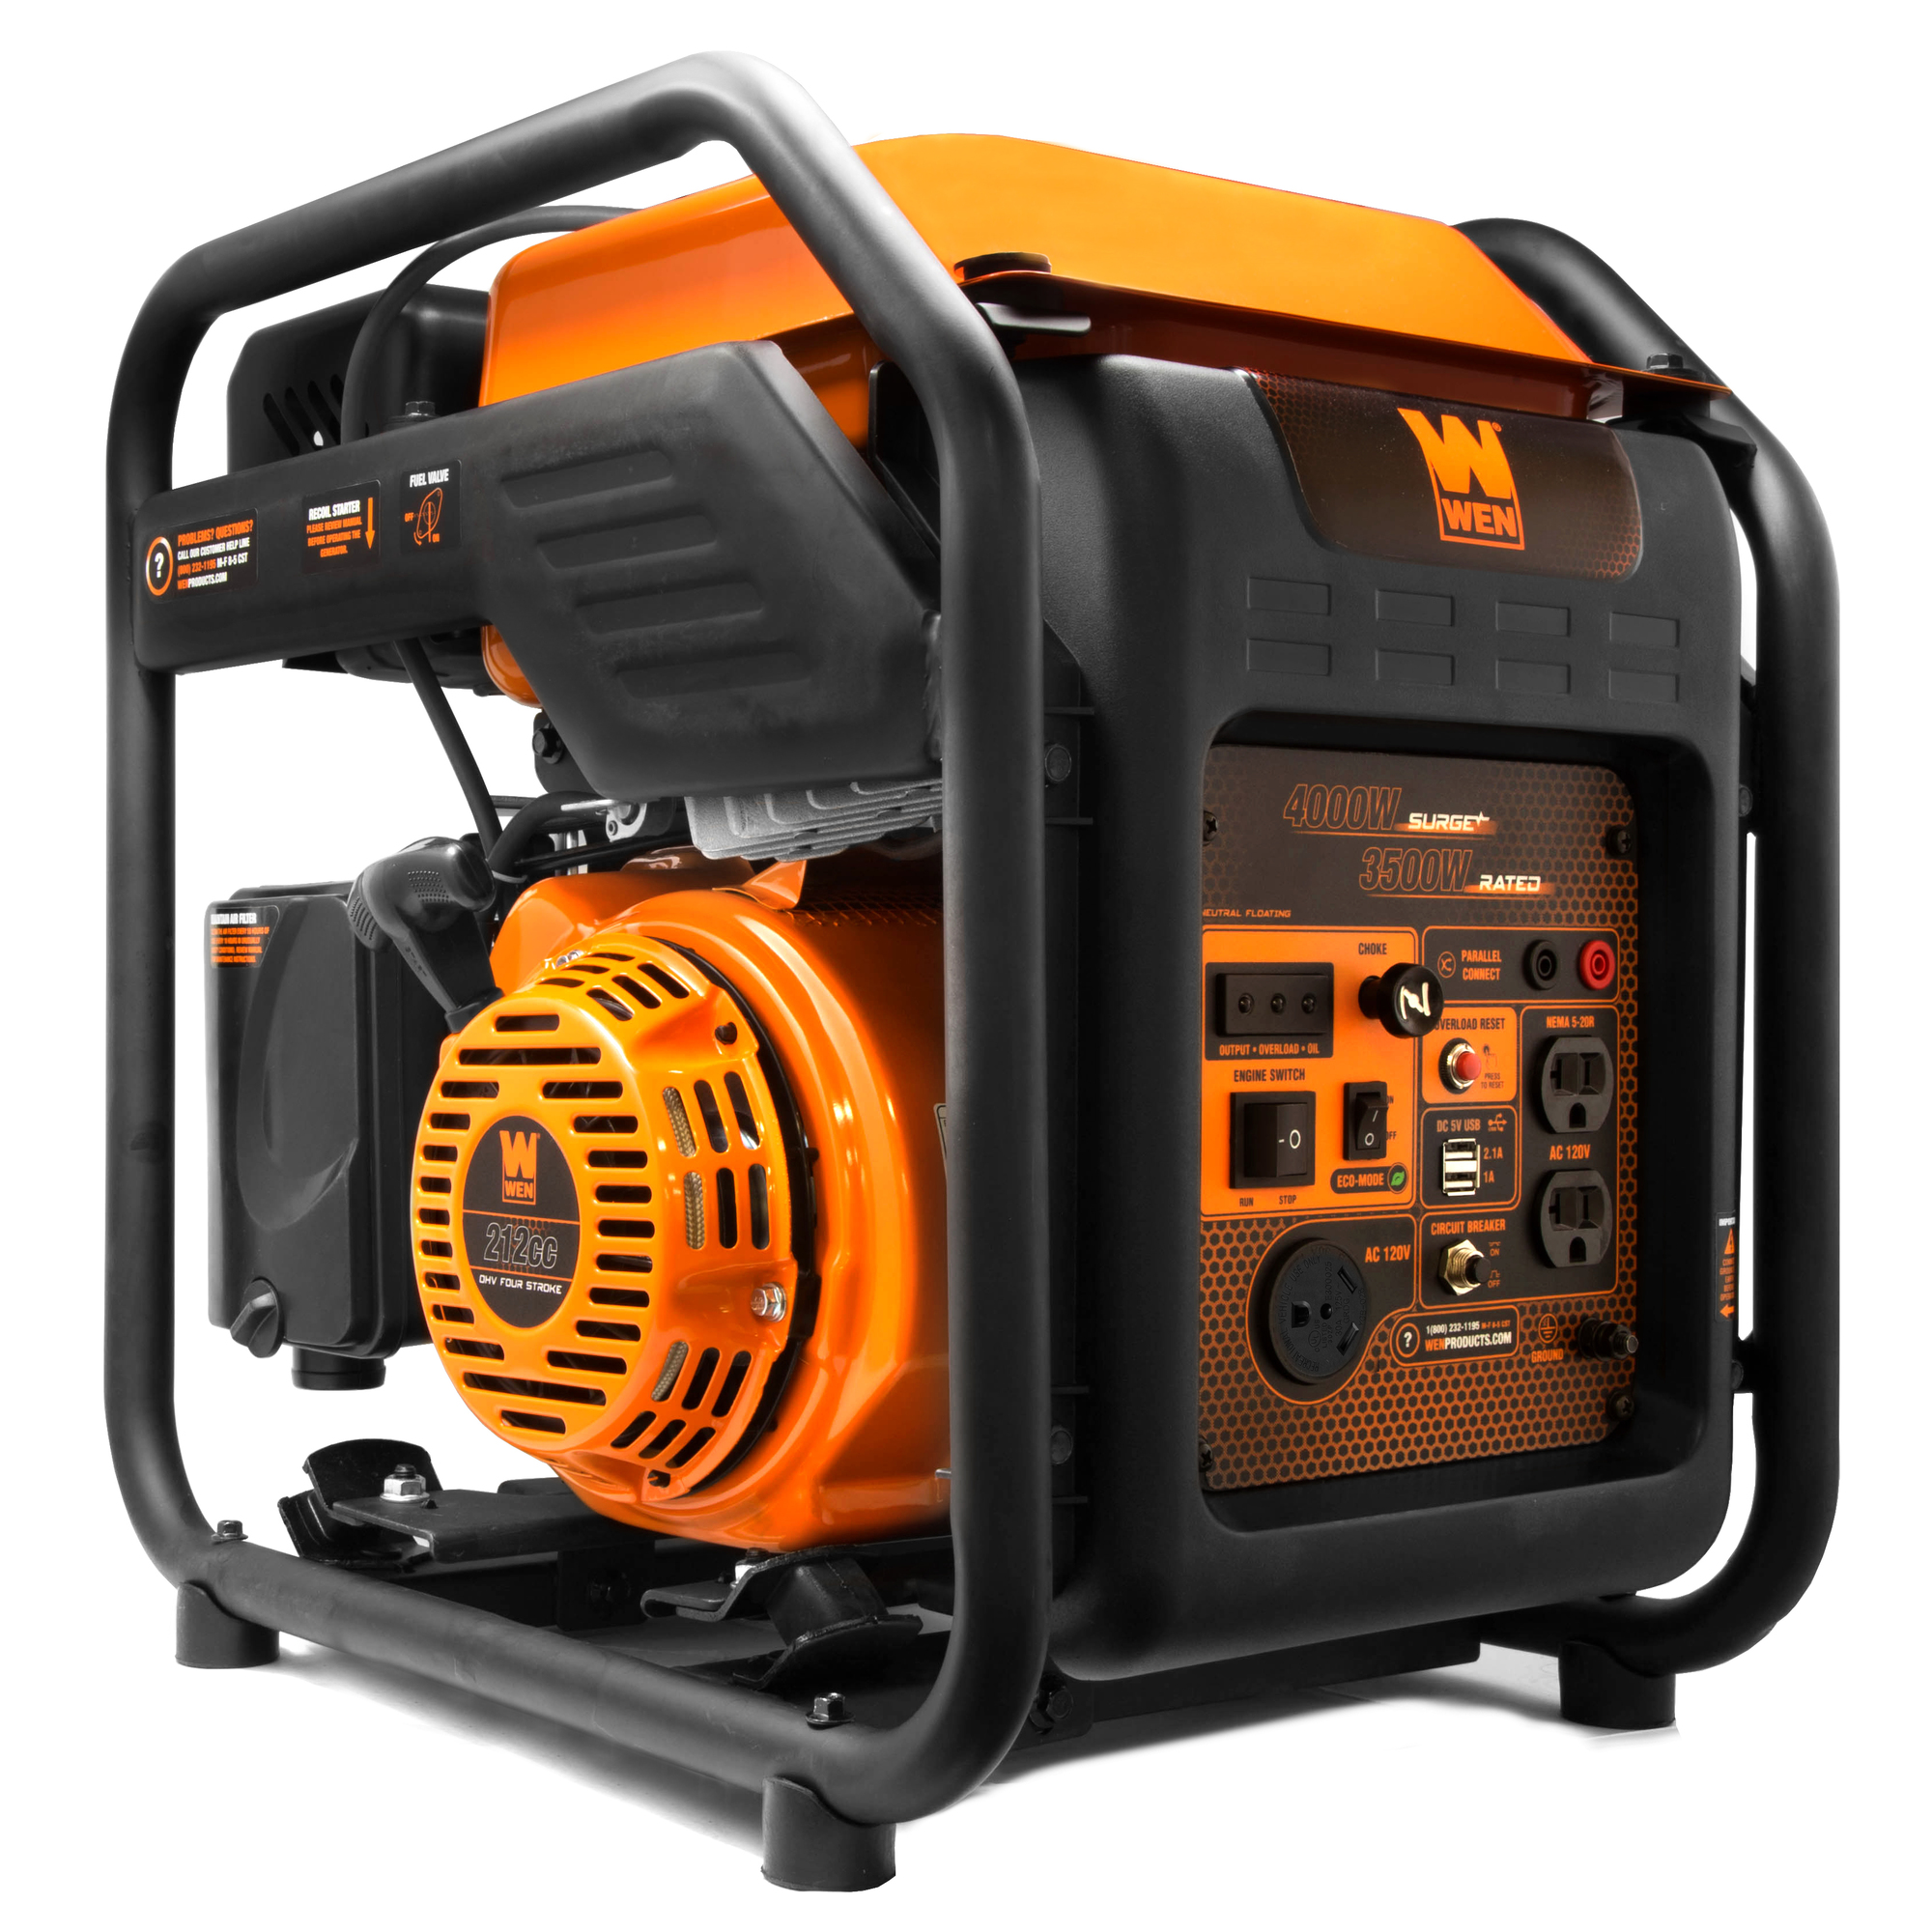 WEN, RV-Ready 4000W Open Frame Inverter Generator, Surge Watts 4000 Rated Watts 3500 Voltage 120 Model GN400i